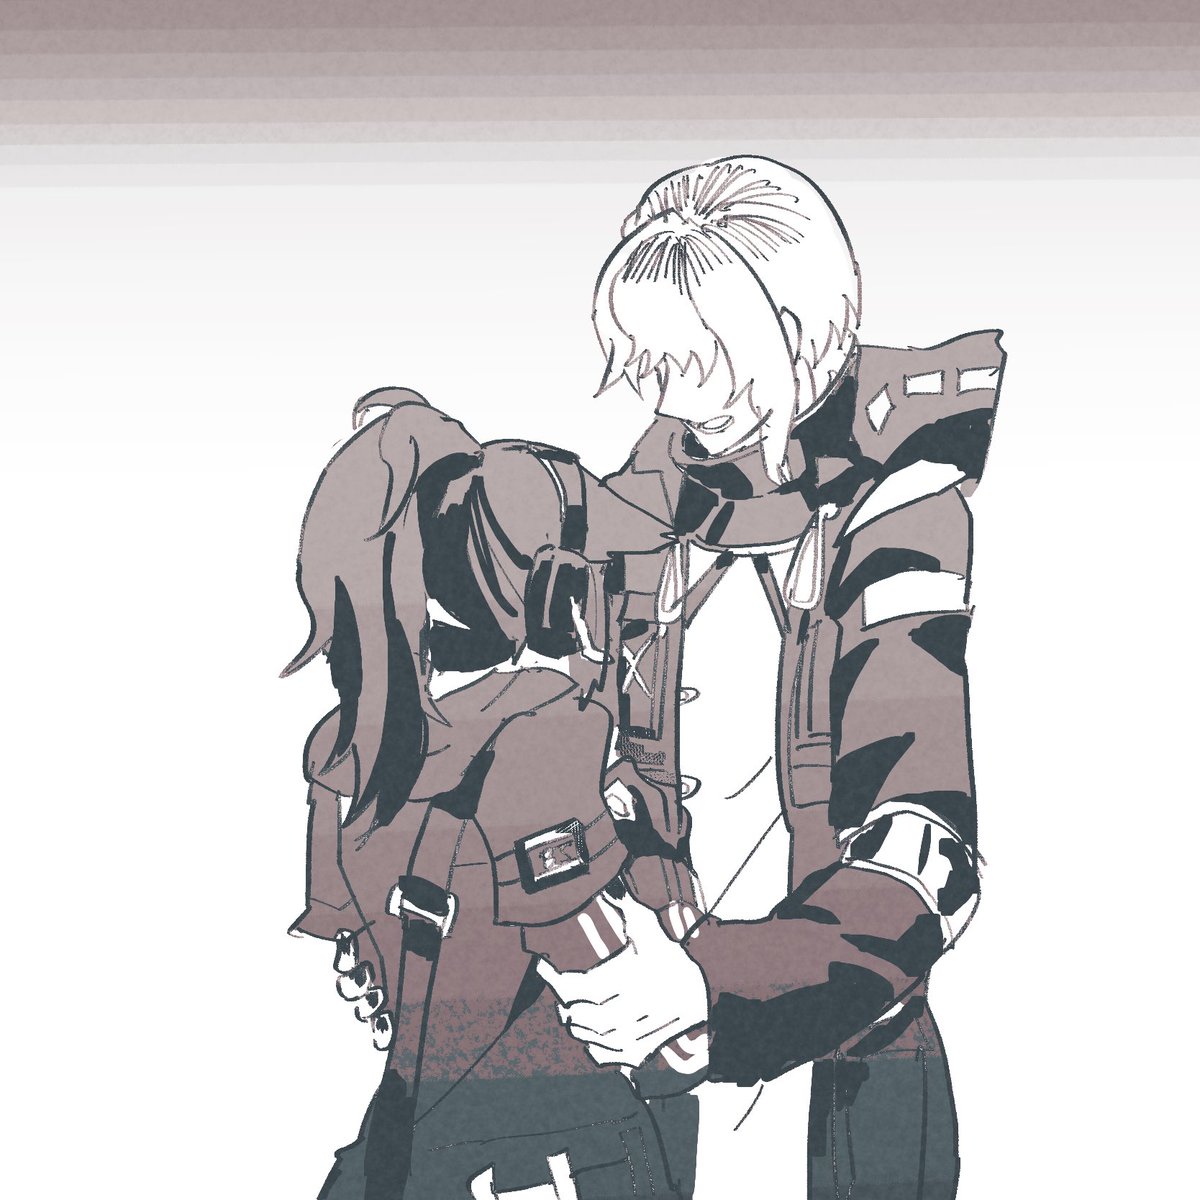 [Arknights - OCdokutah⚠️]
I-I just read Darknights Memoir spoilers and I can't wait for it to come to EN server………
Our dokutah is really babying Jessica
#Arknights #doctorOC 